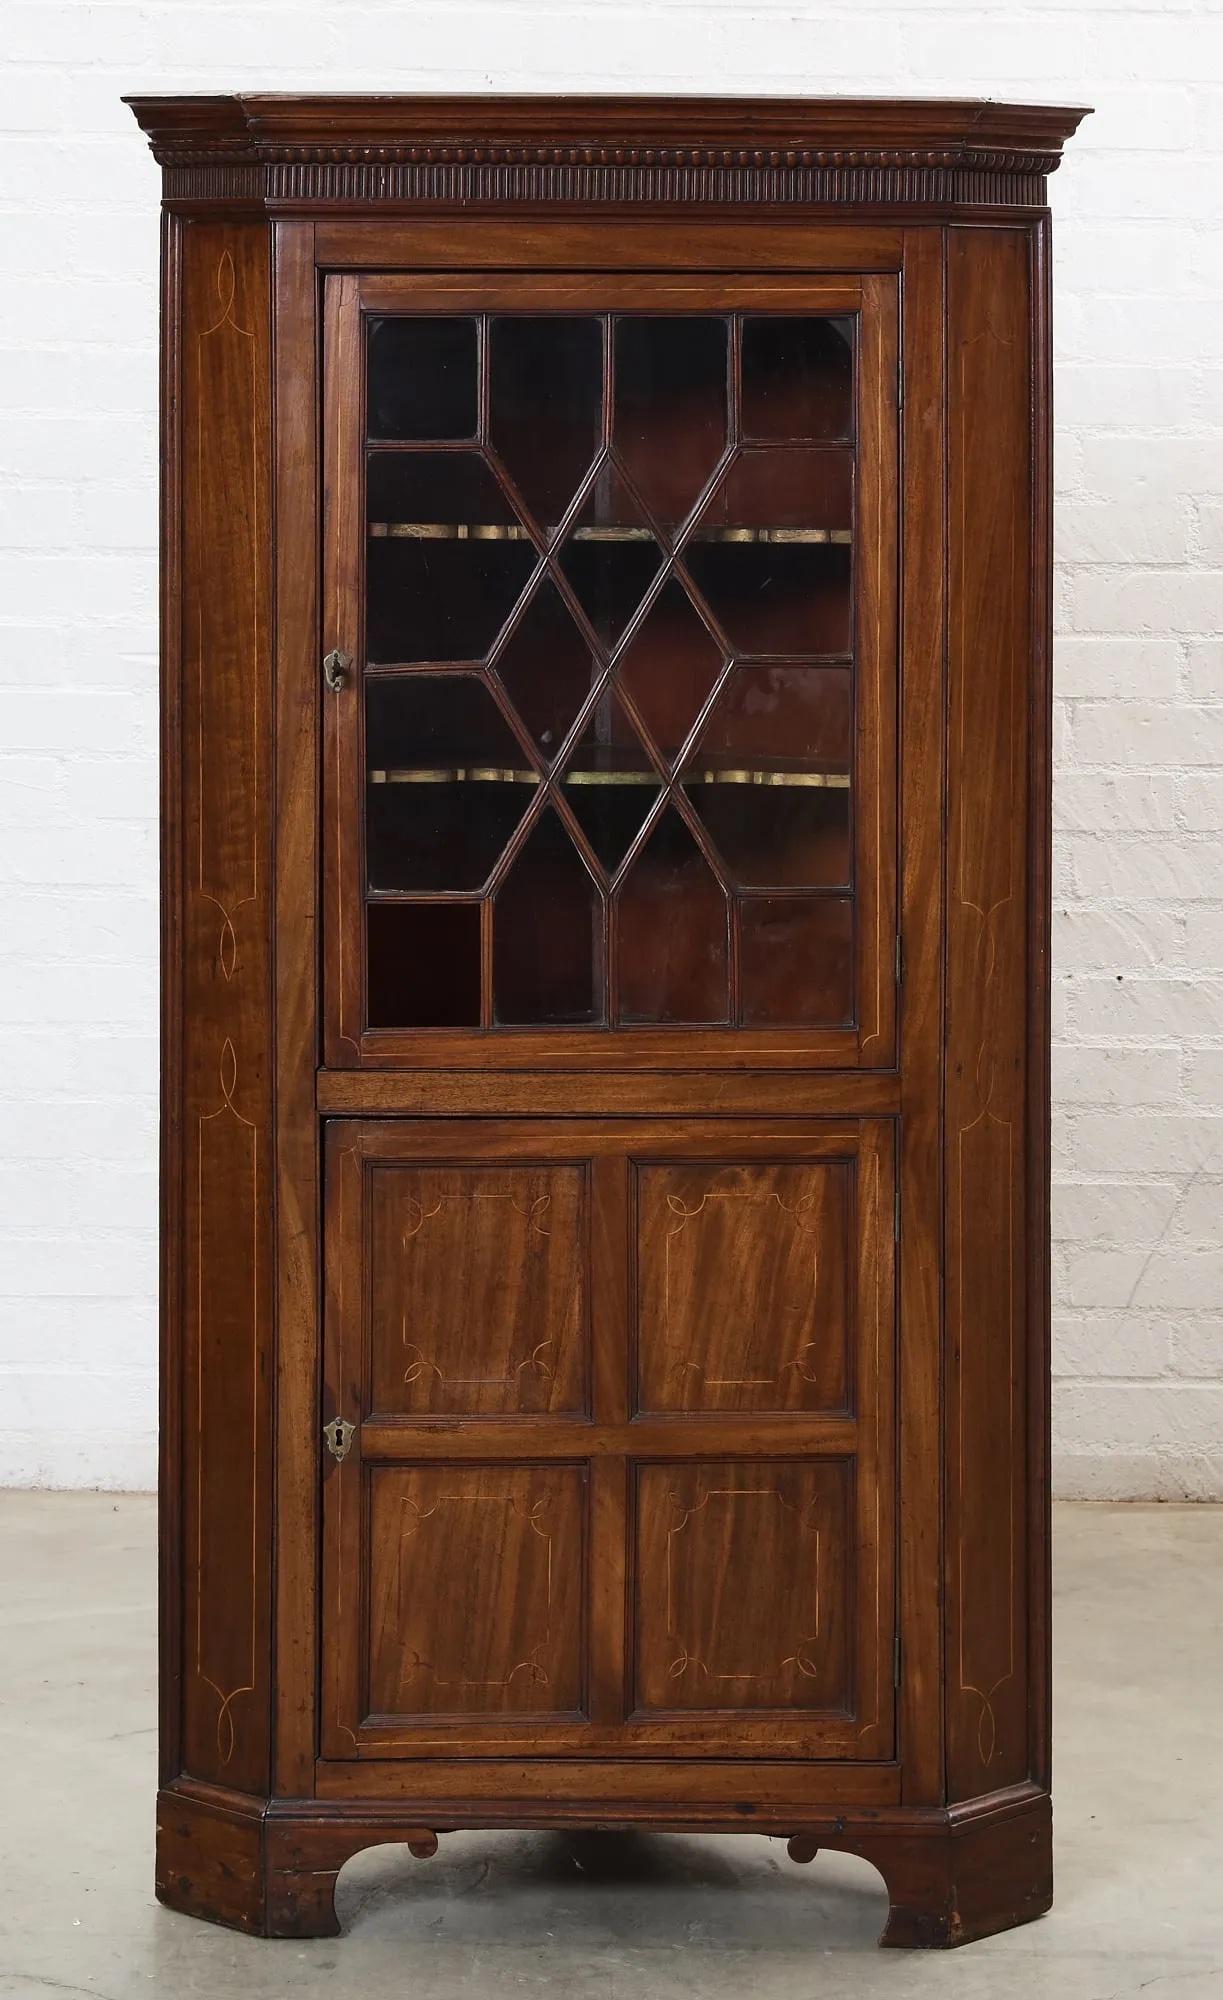 Late 18th Century American Federal Inlaid Mahogany Corner Cabinet with an overhanging dentil molded cornice above the upper section with a diamond pattern individually glazed divided lite door opening to a compartment with two shelves. The lower